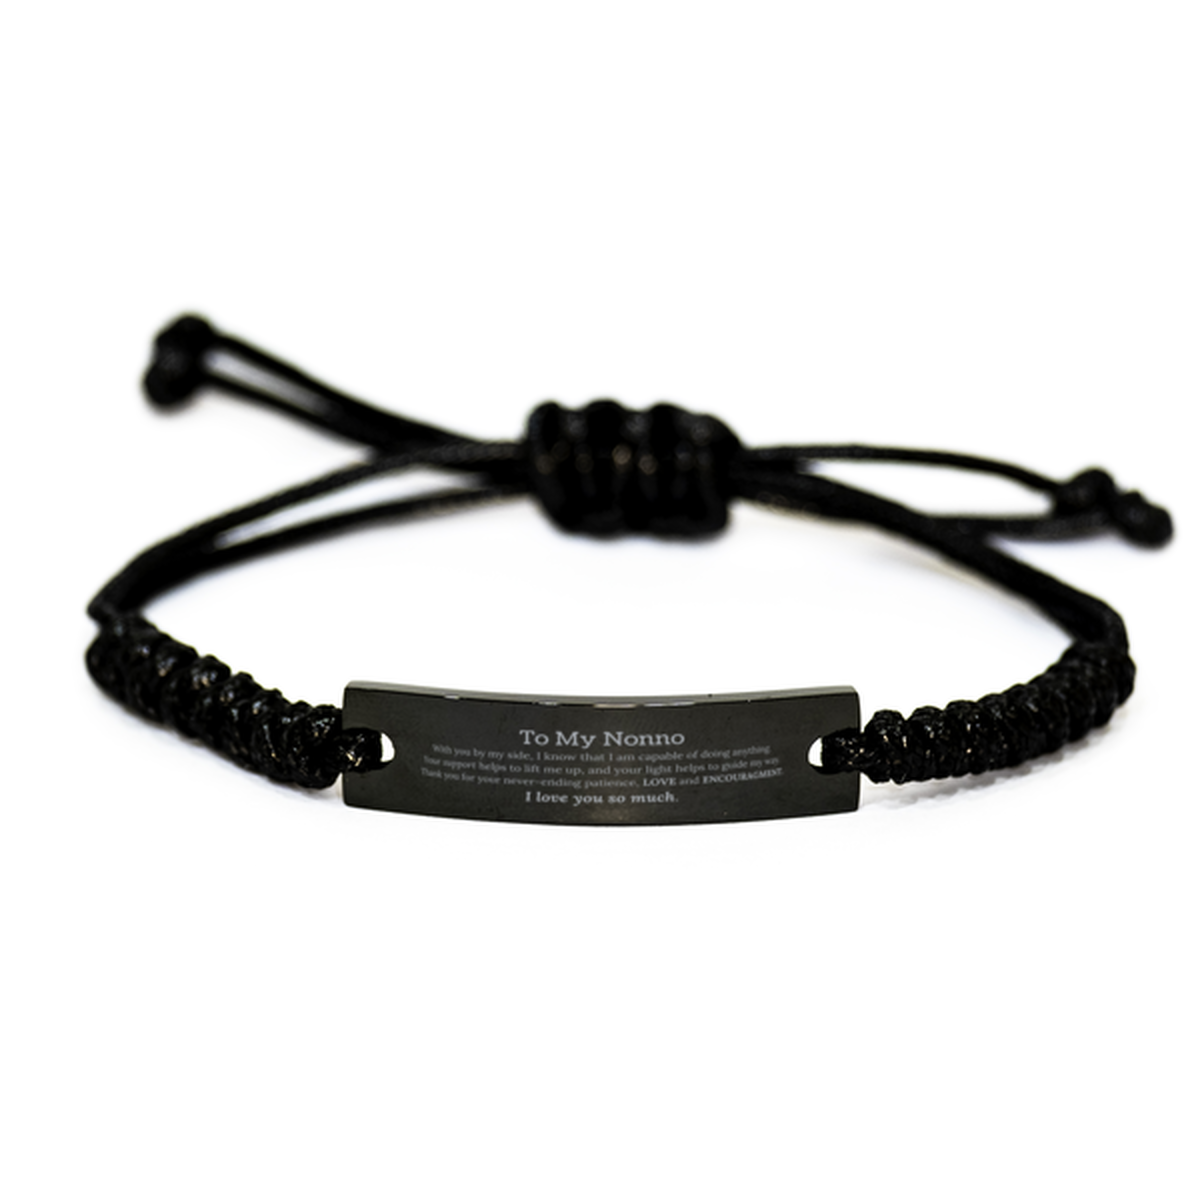 Appreciation Nonno Black Rope Bracelet Gifts, To My Nonno Birthday Christmas Wedding Keepsake Gifts for Nonno With you by my side, I know that I am capable of doing anything. I love you so much